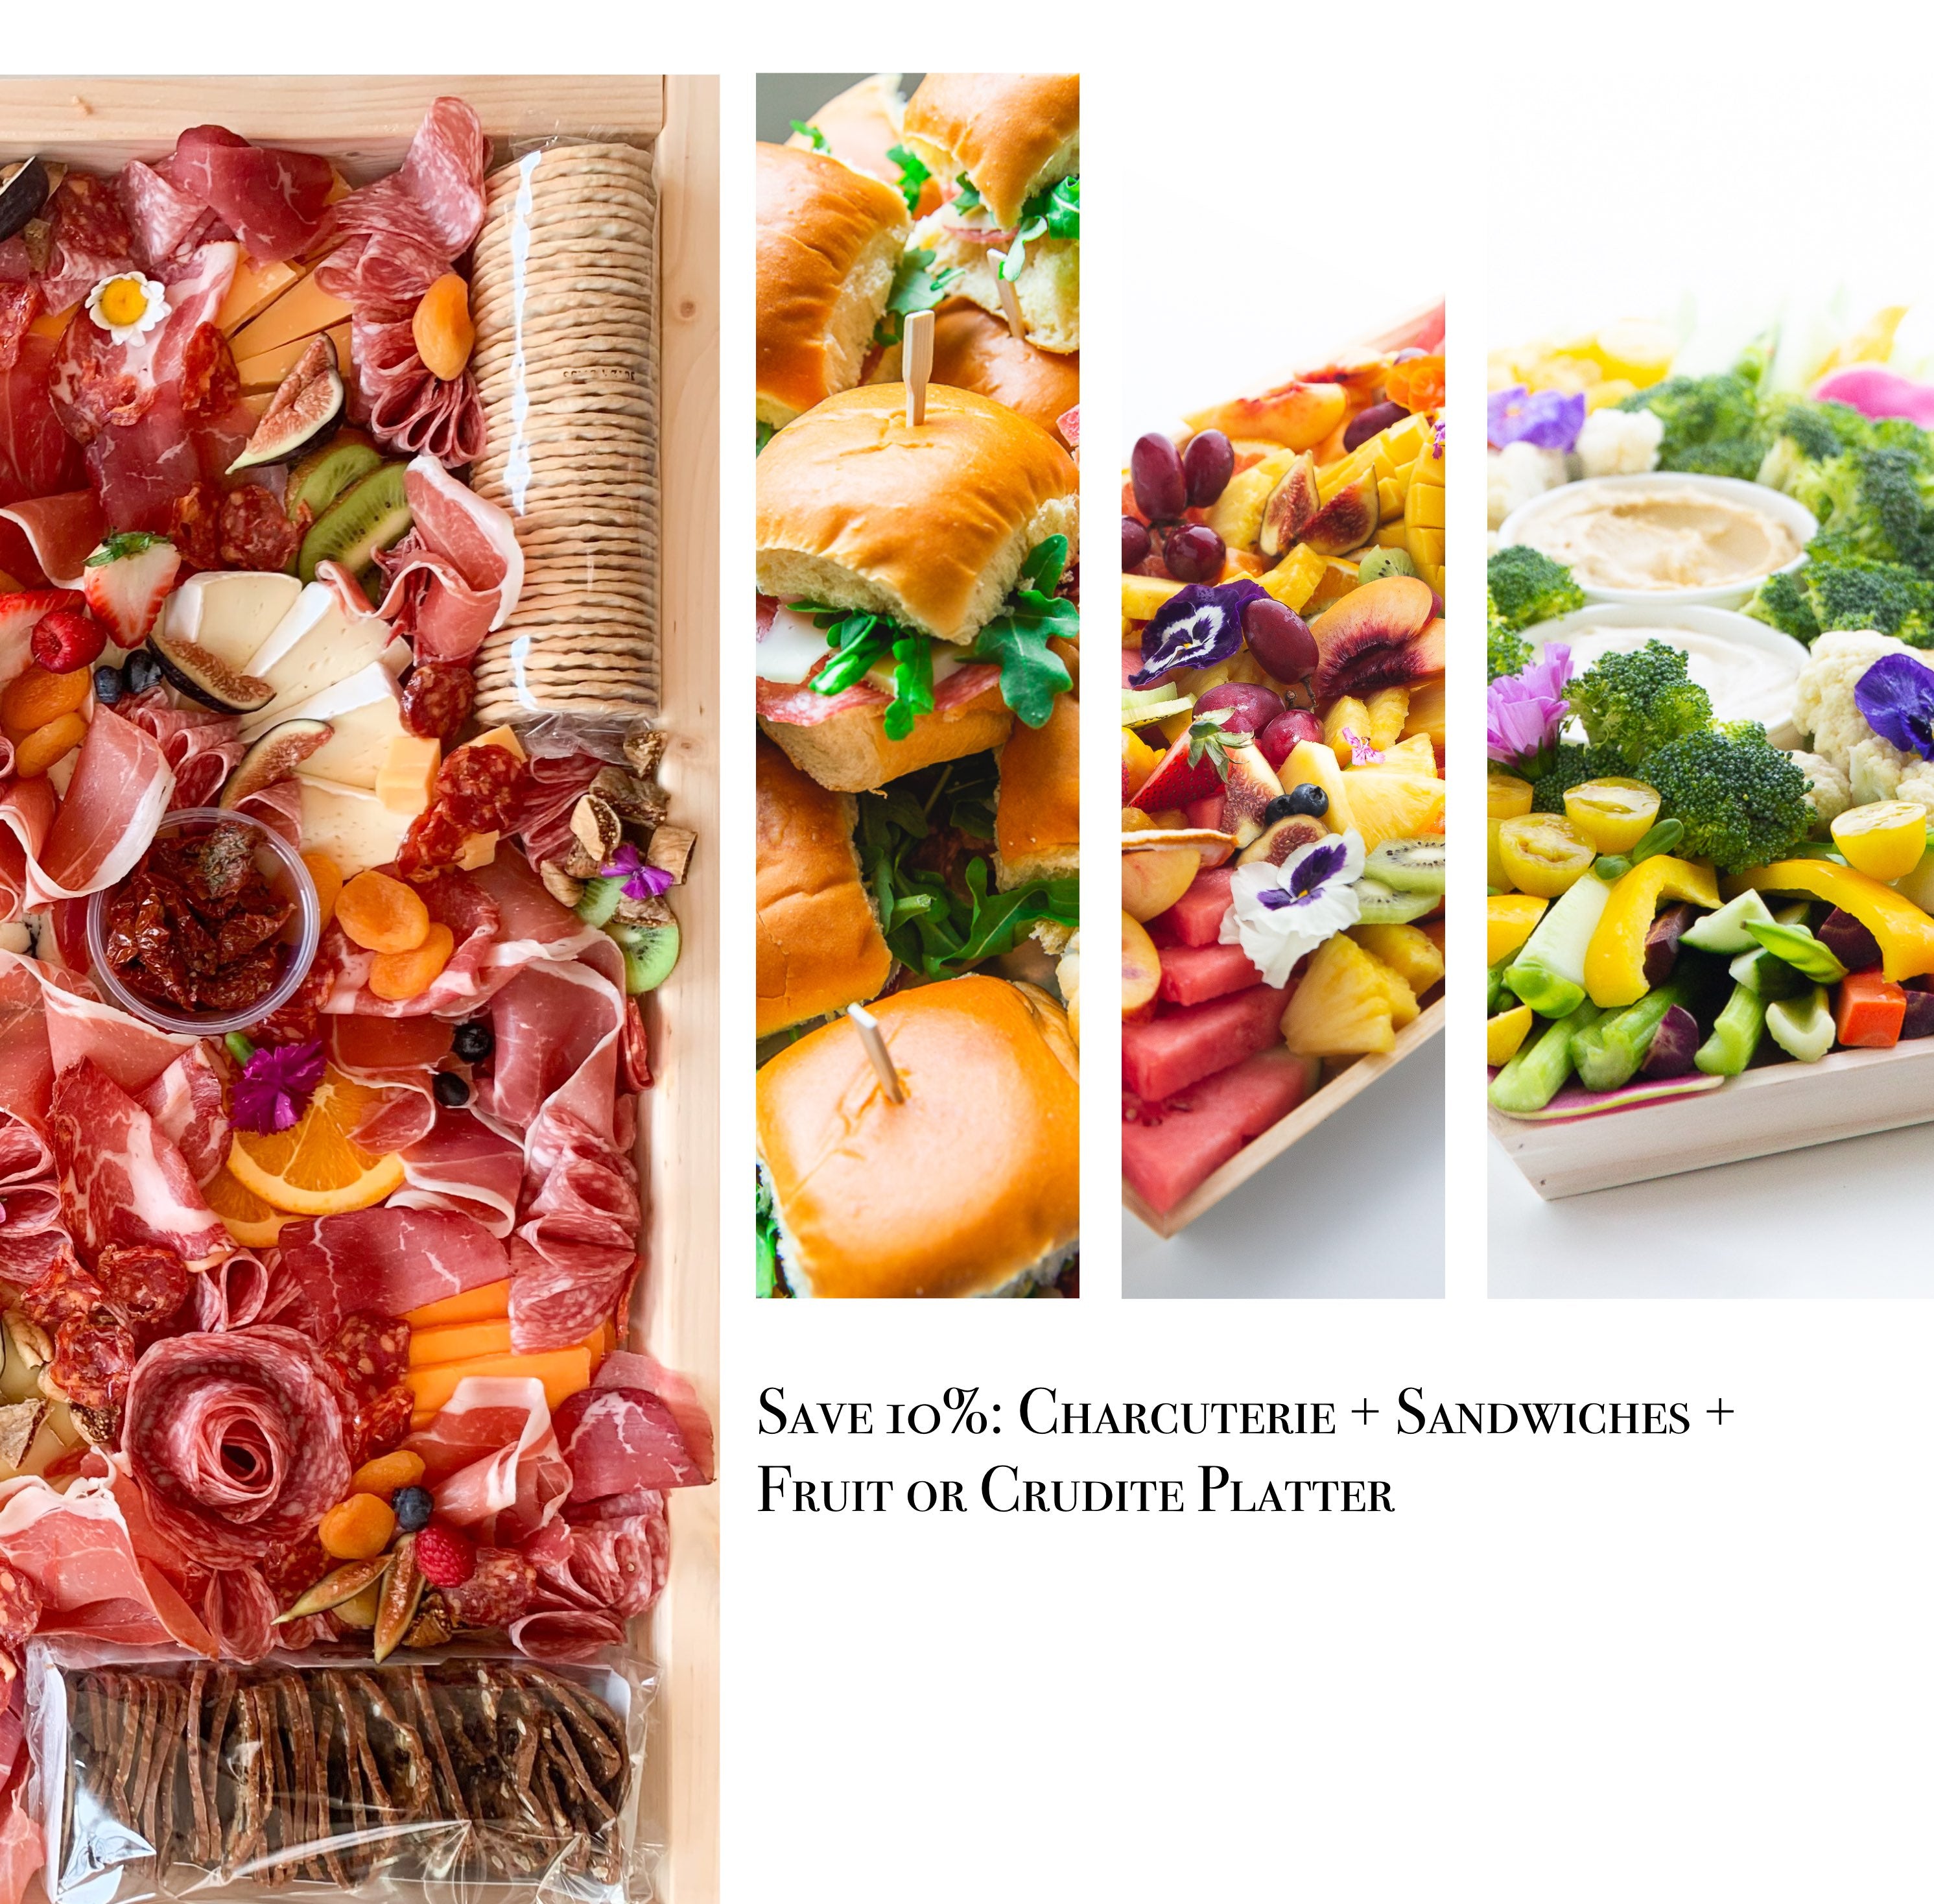 Best charcuterie bundle for 30 - 35 guests for delivery in Toronto Ontario